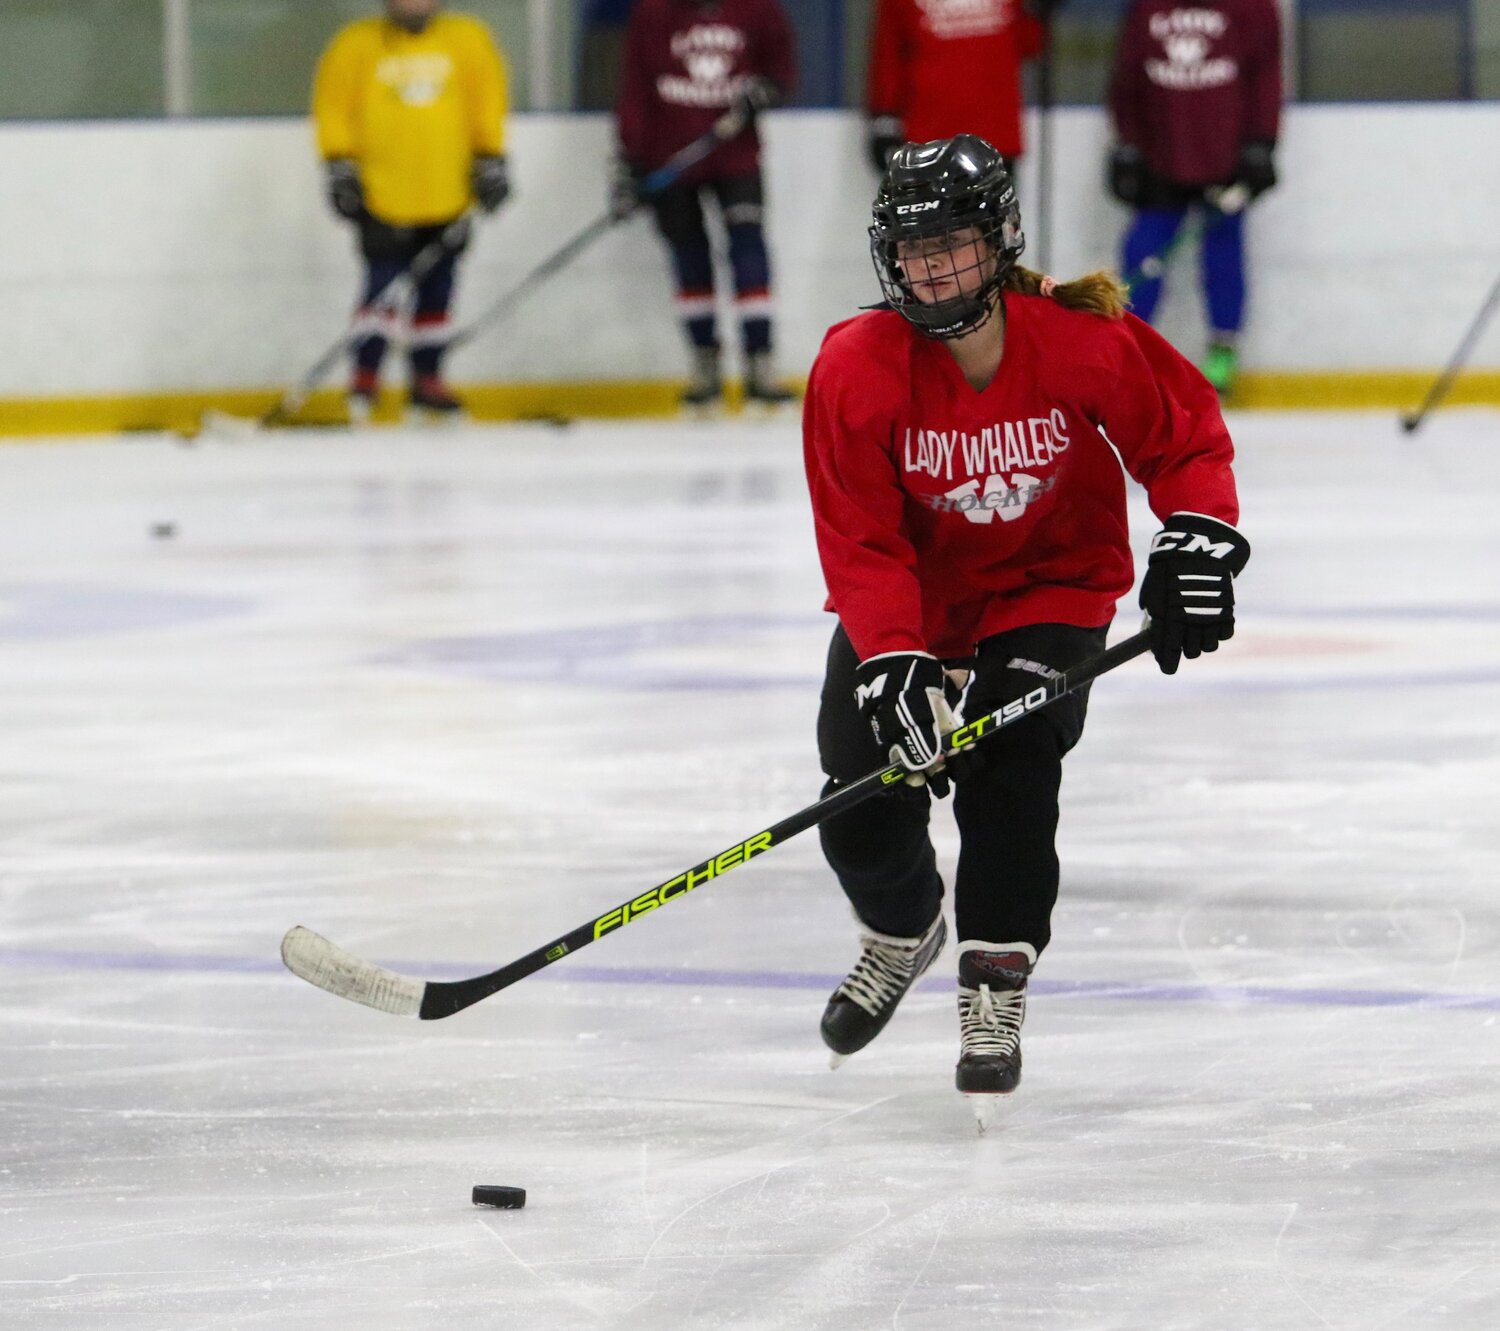 Monday marked the first day of winter sports practices for the Whalers basketball, hockey and swimming and diving teams.